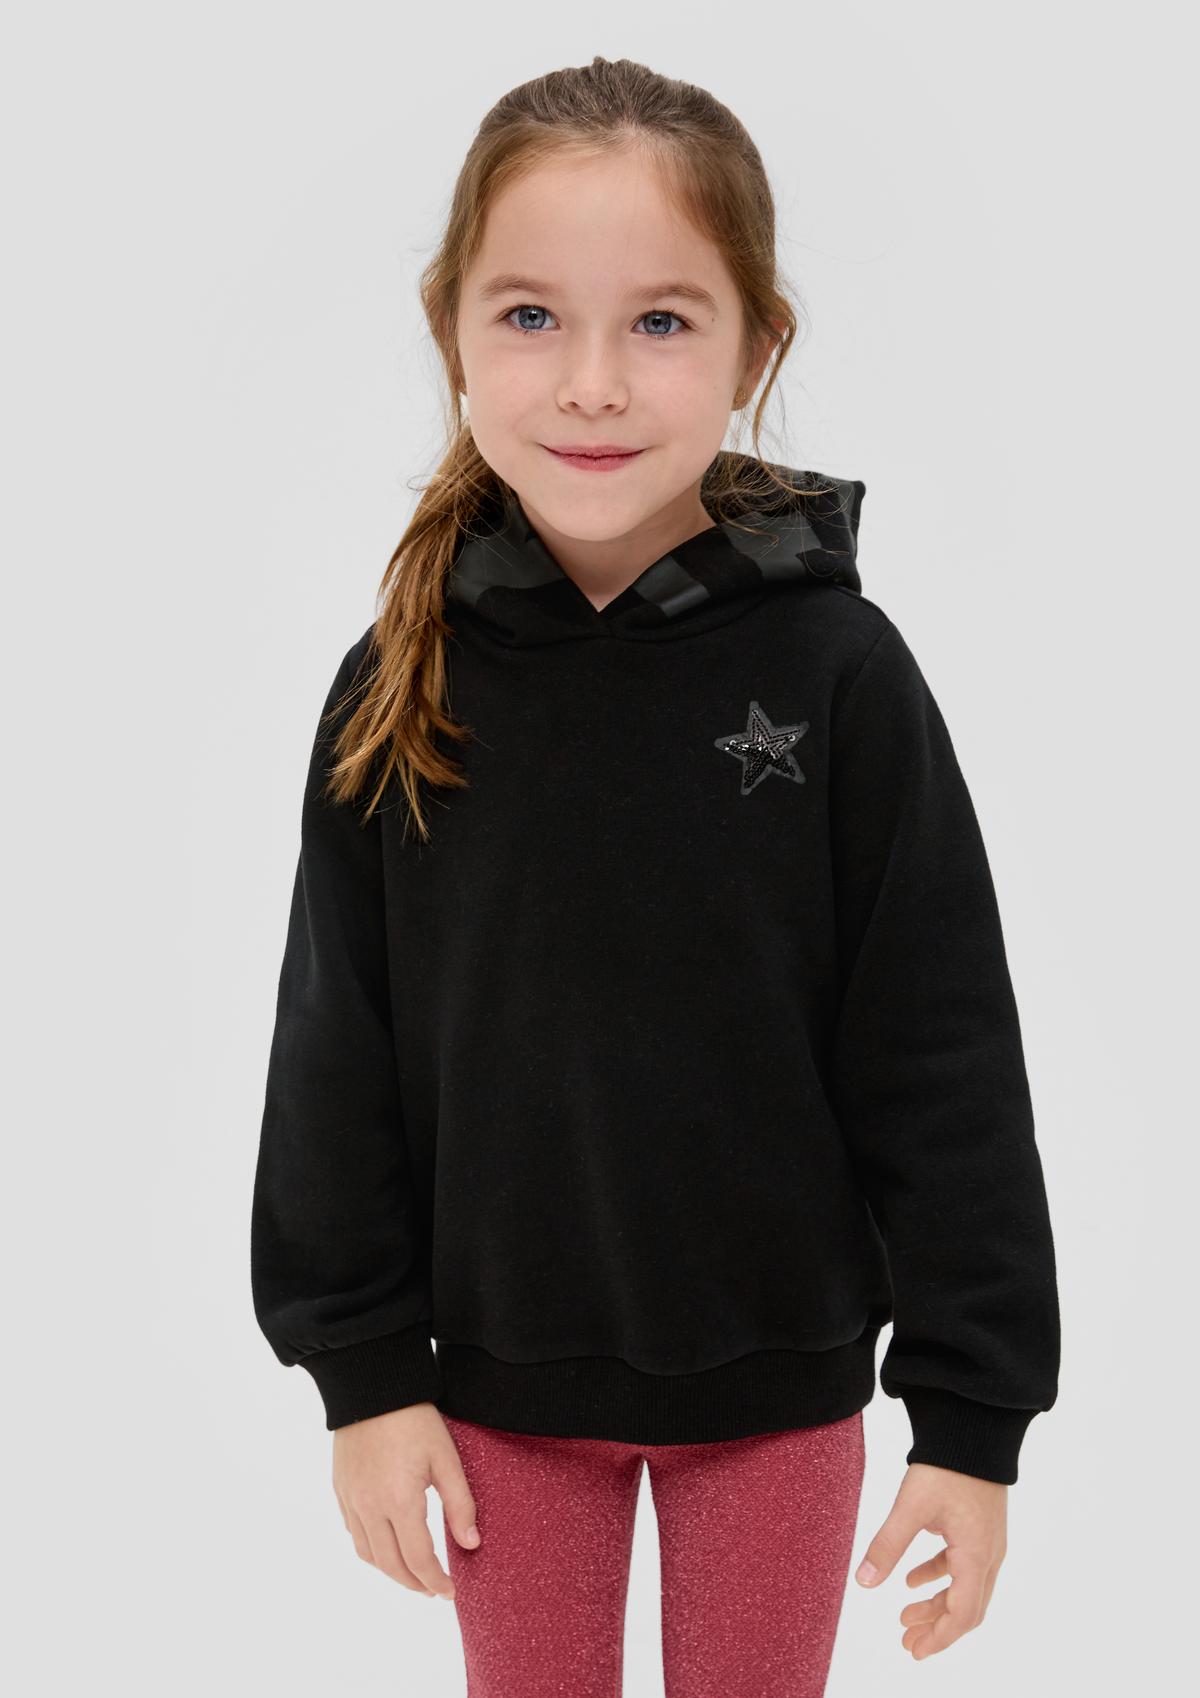 Sweatshirt with a sequin detail